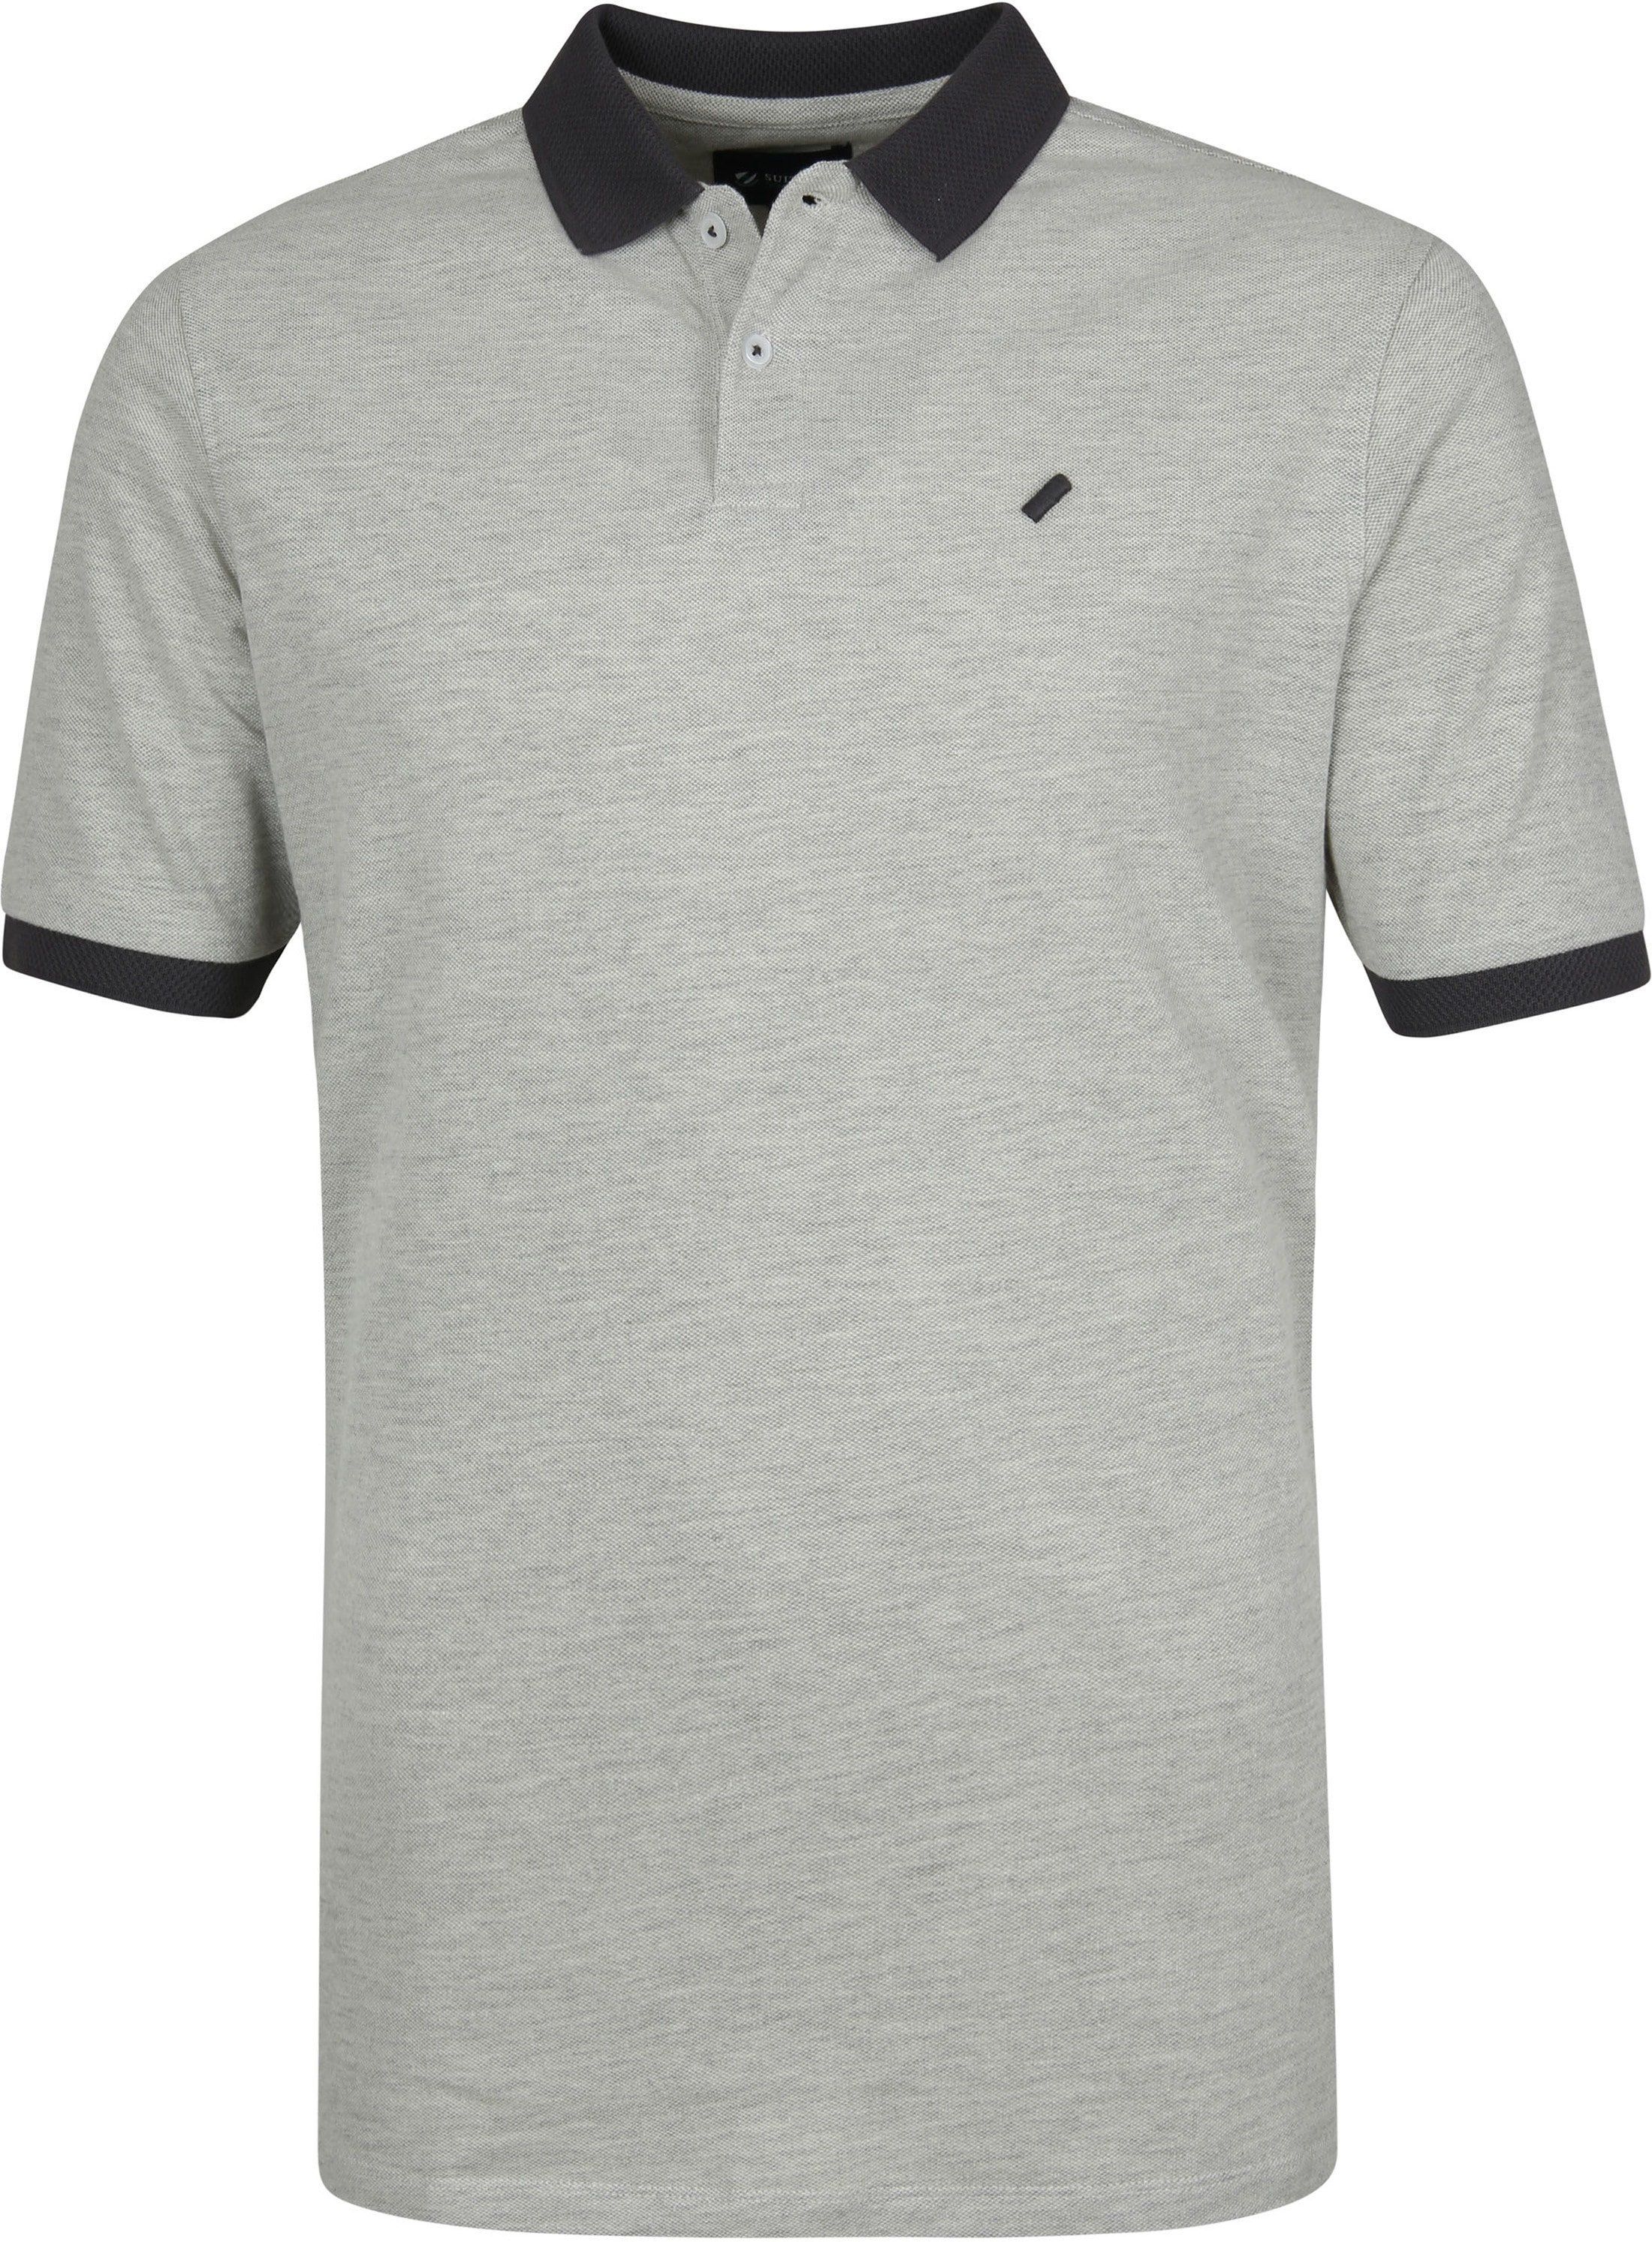 Suitable Respect Claas Polo Shirt Grey size M